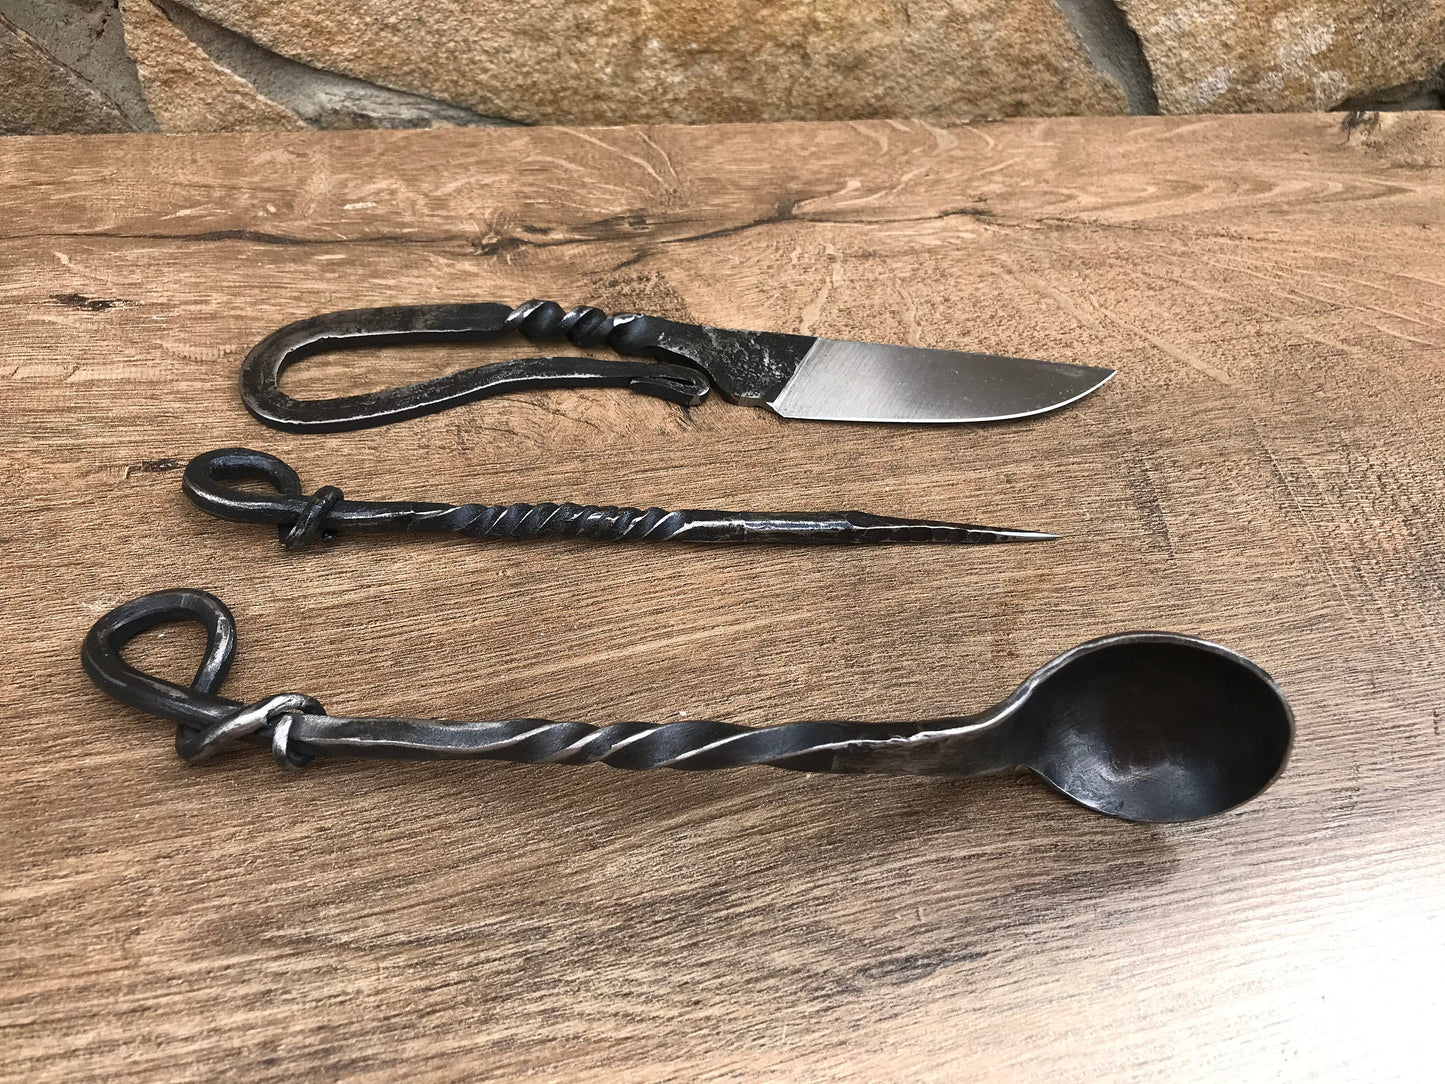 Viking steel cutlery set, rustic cutlery, reenactment, SCA, LARP, medieval kitchen,viking style cutlery,rustic kitchen,forged fork,traveling